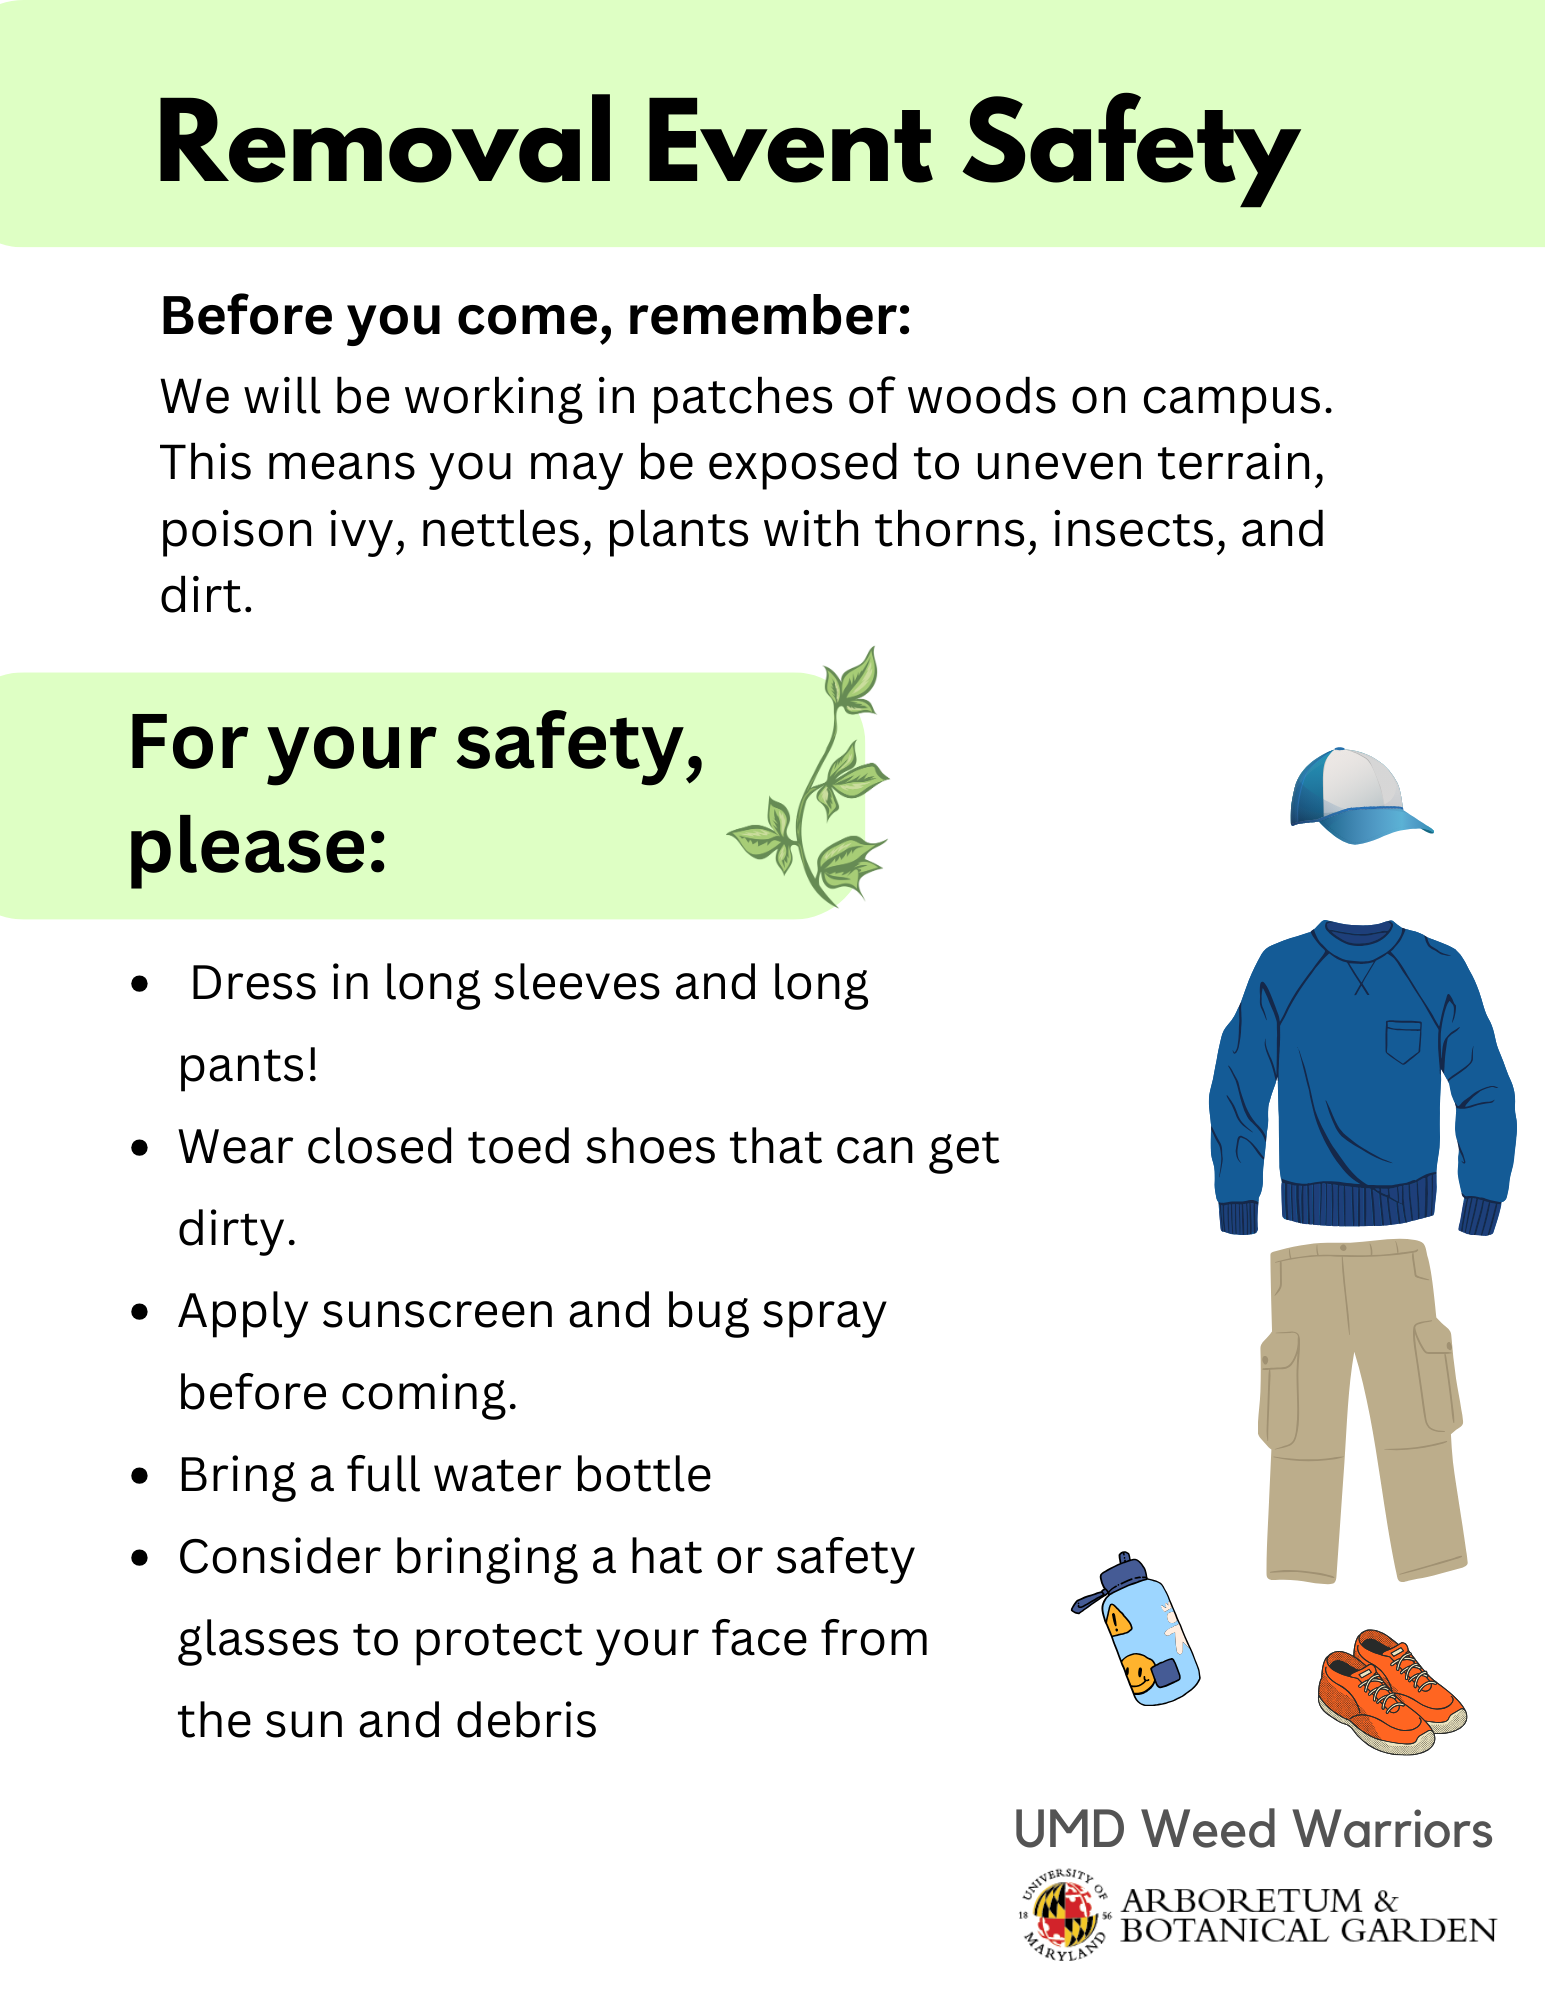 Removal Event Safety Sheet